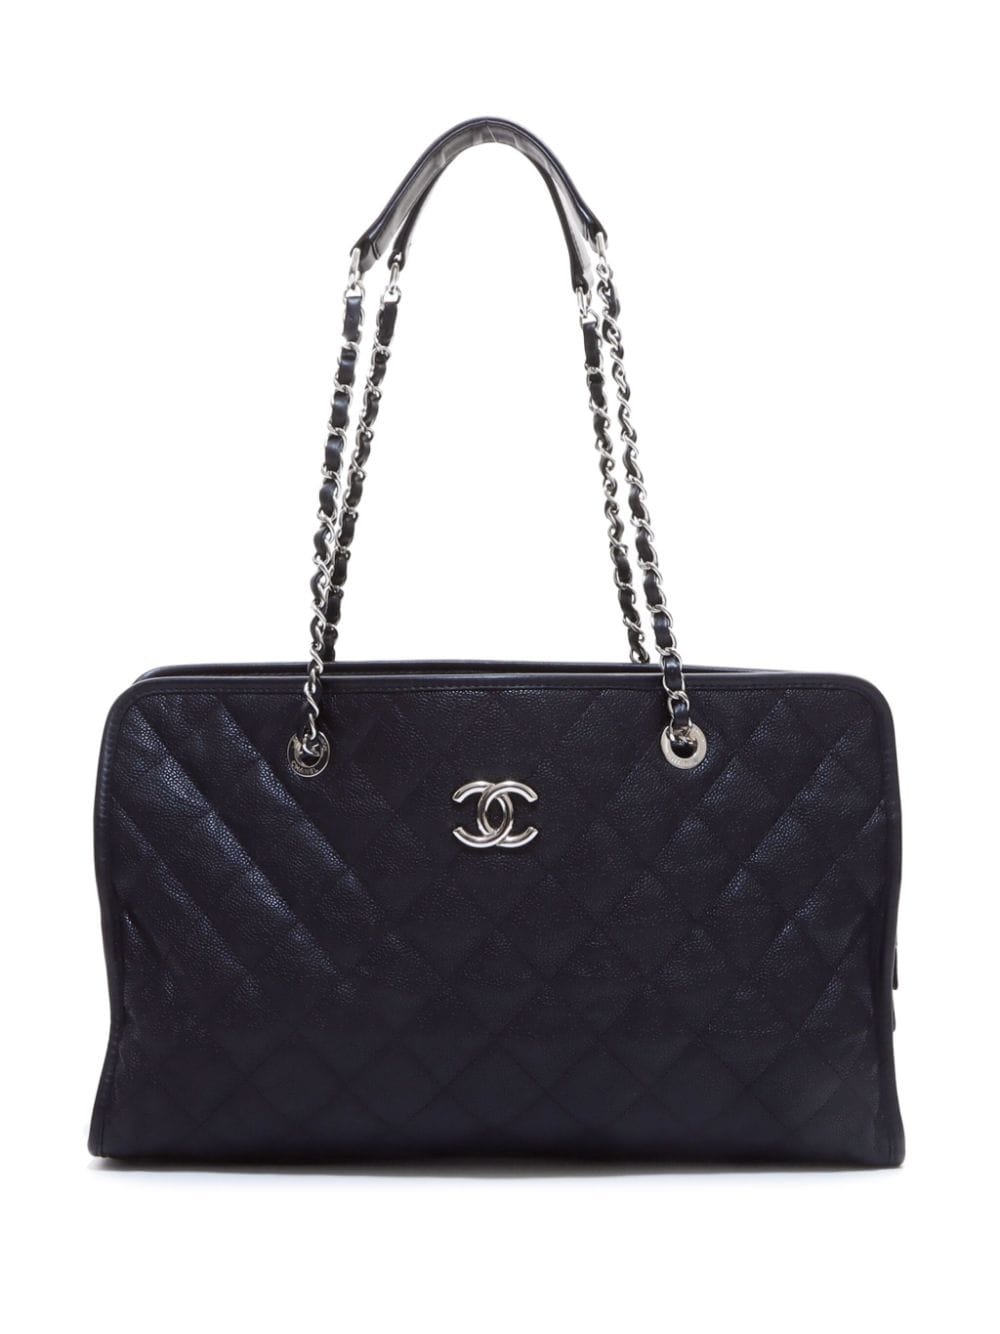 Pre-owned Chanel 2012 French Riviera Tote Bag In Black